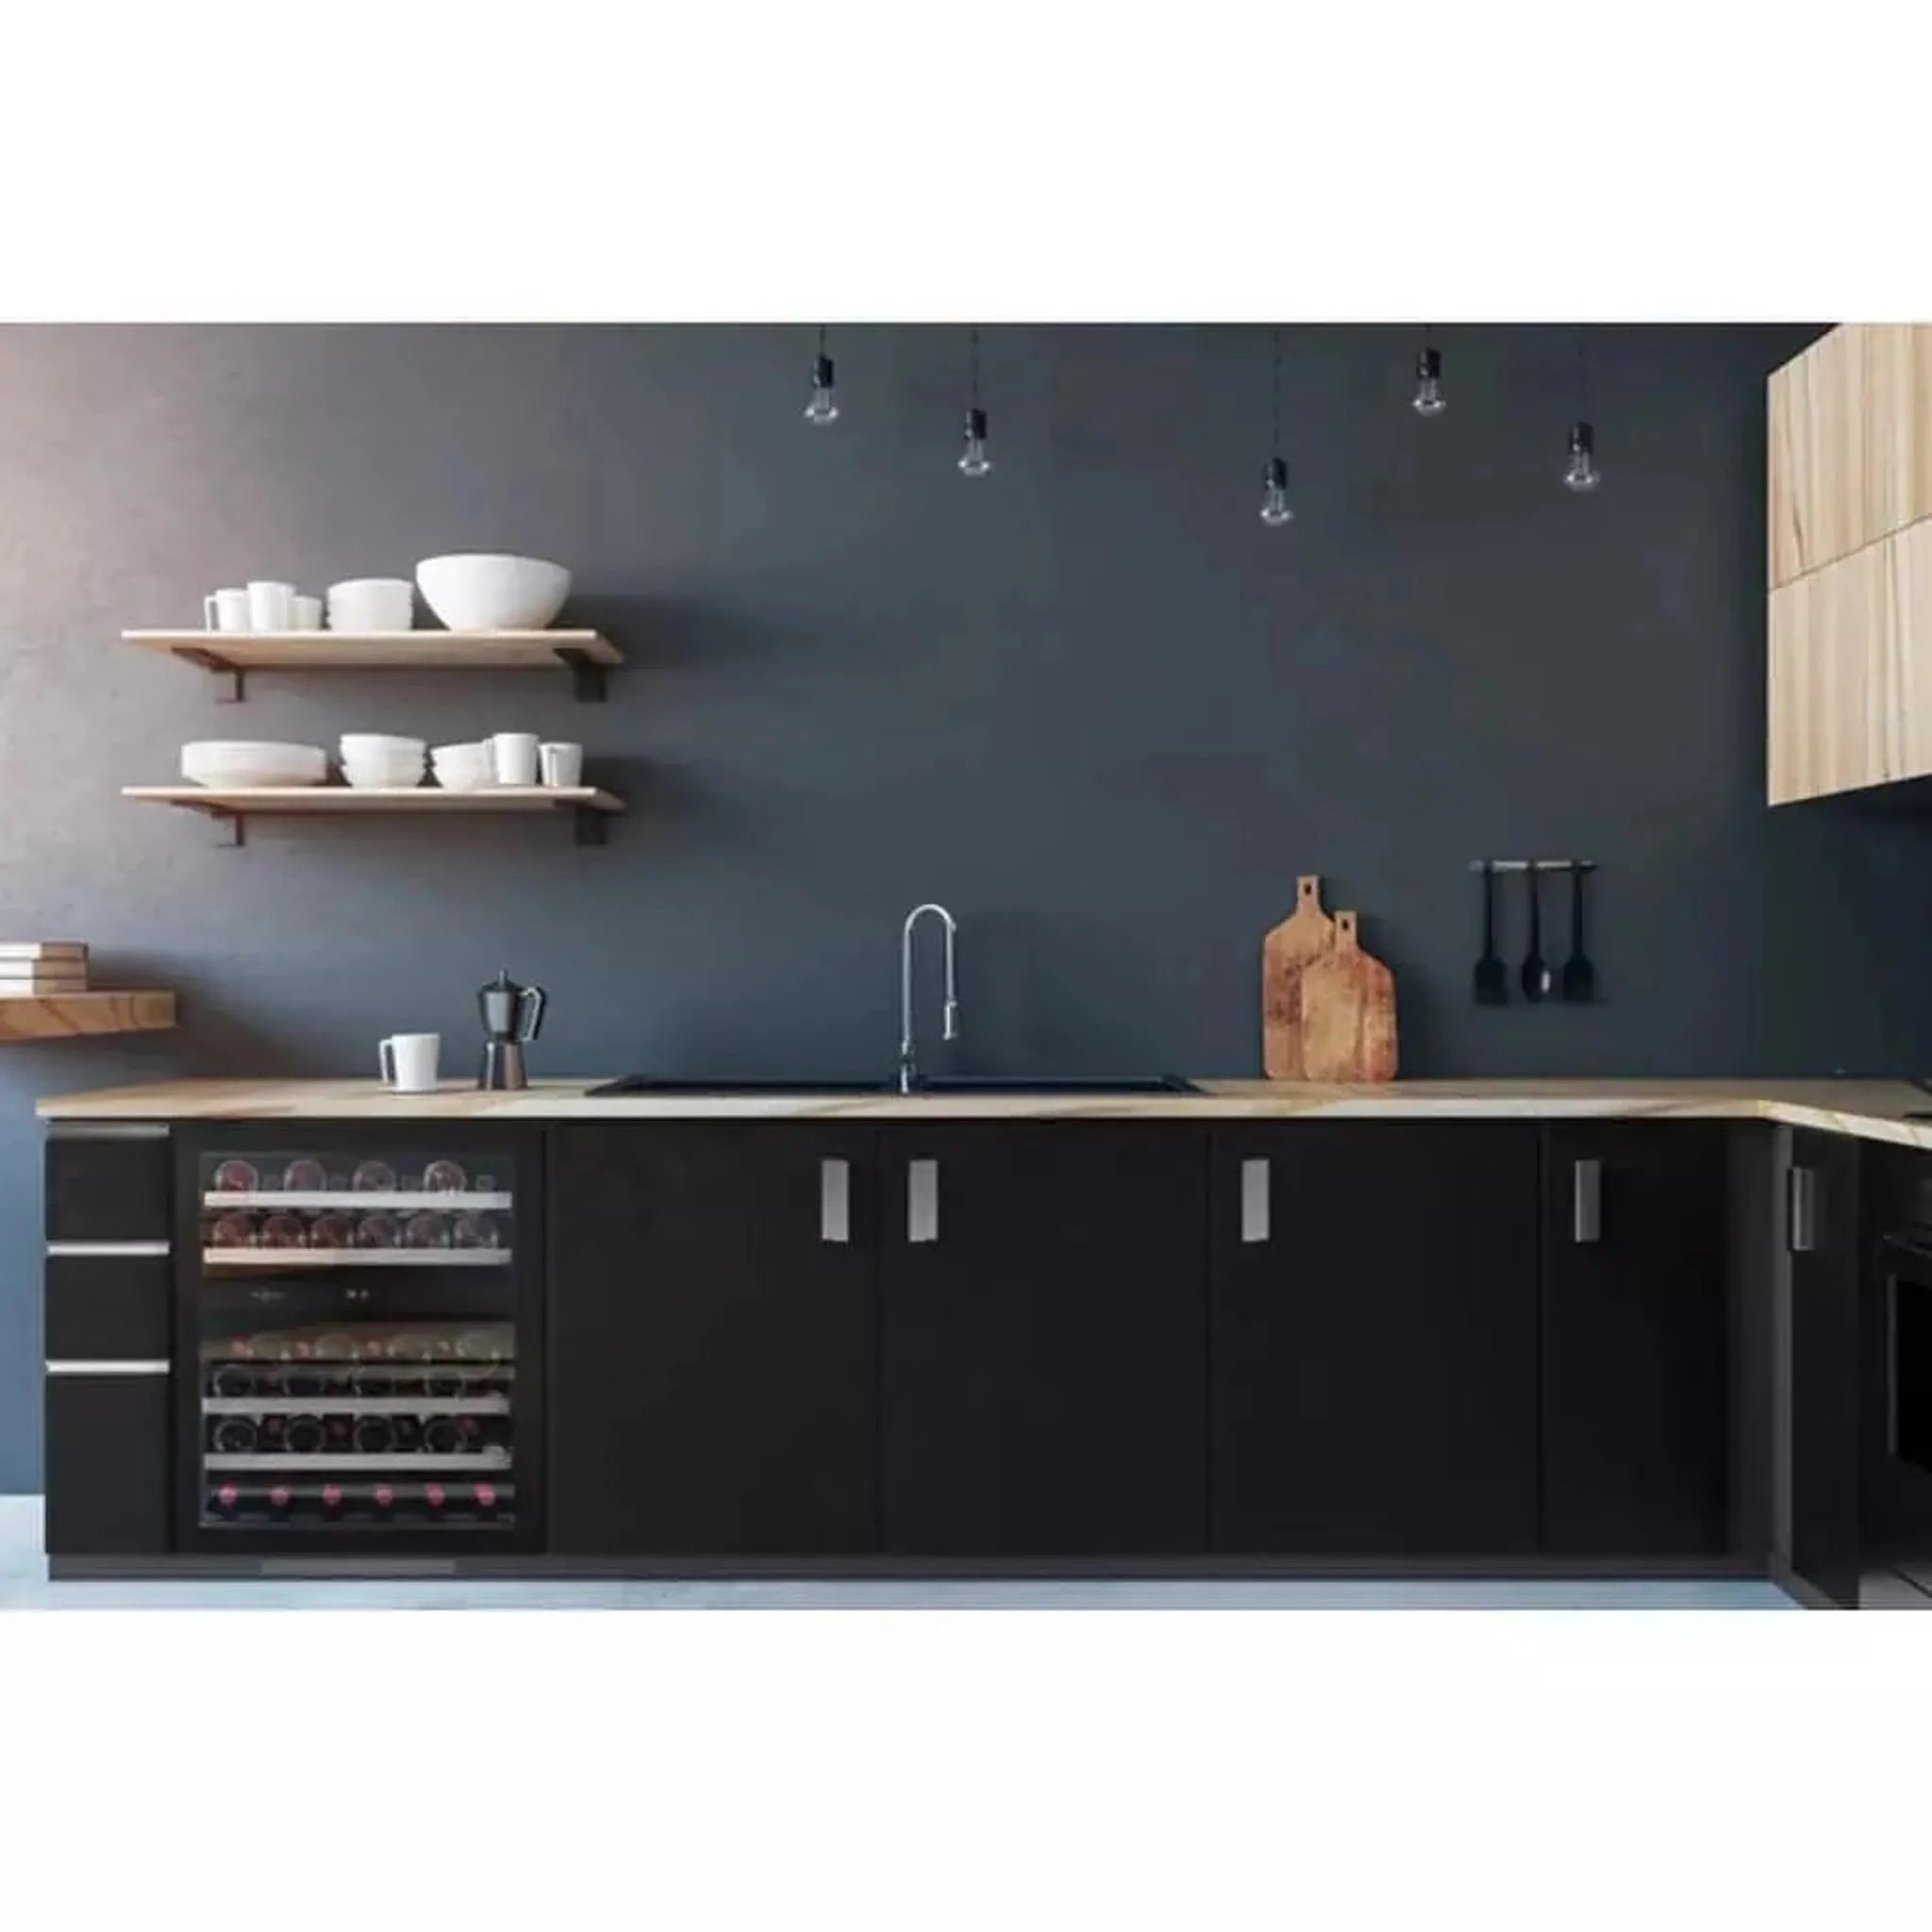 mQuvée - 600mm - Undercounter - WineCave 60D Fullglass Black - Push/Pull